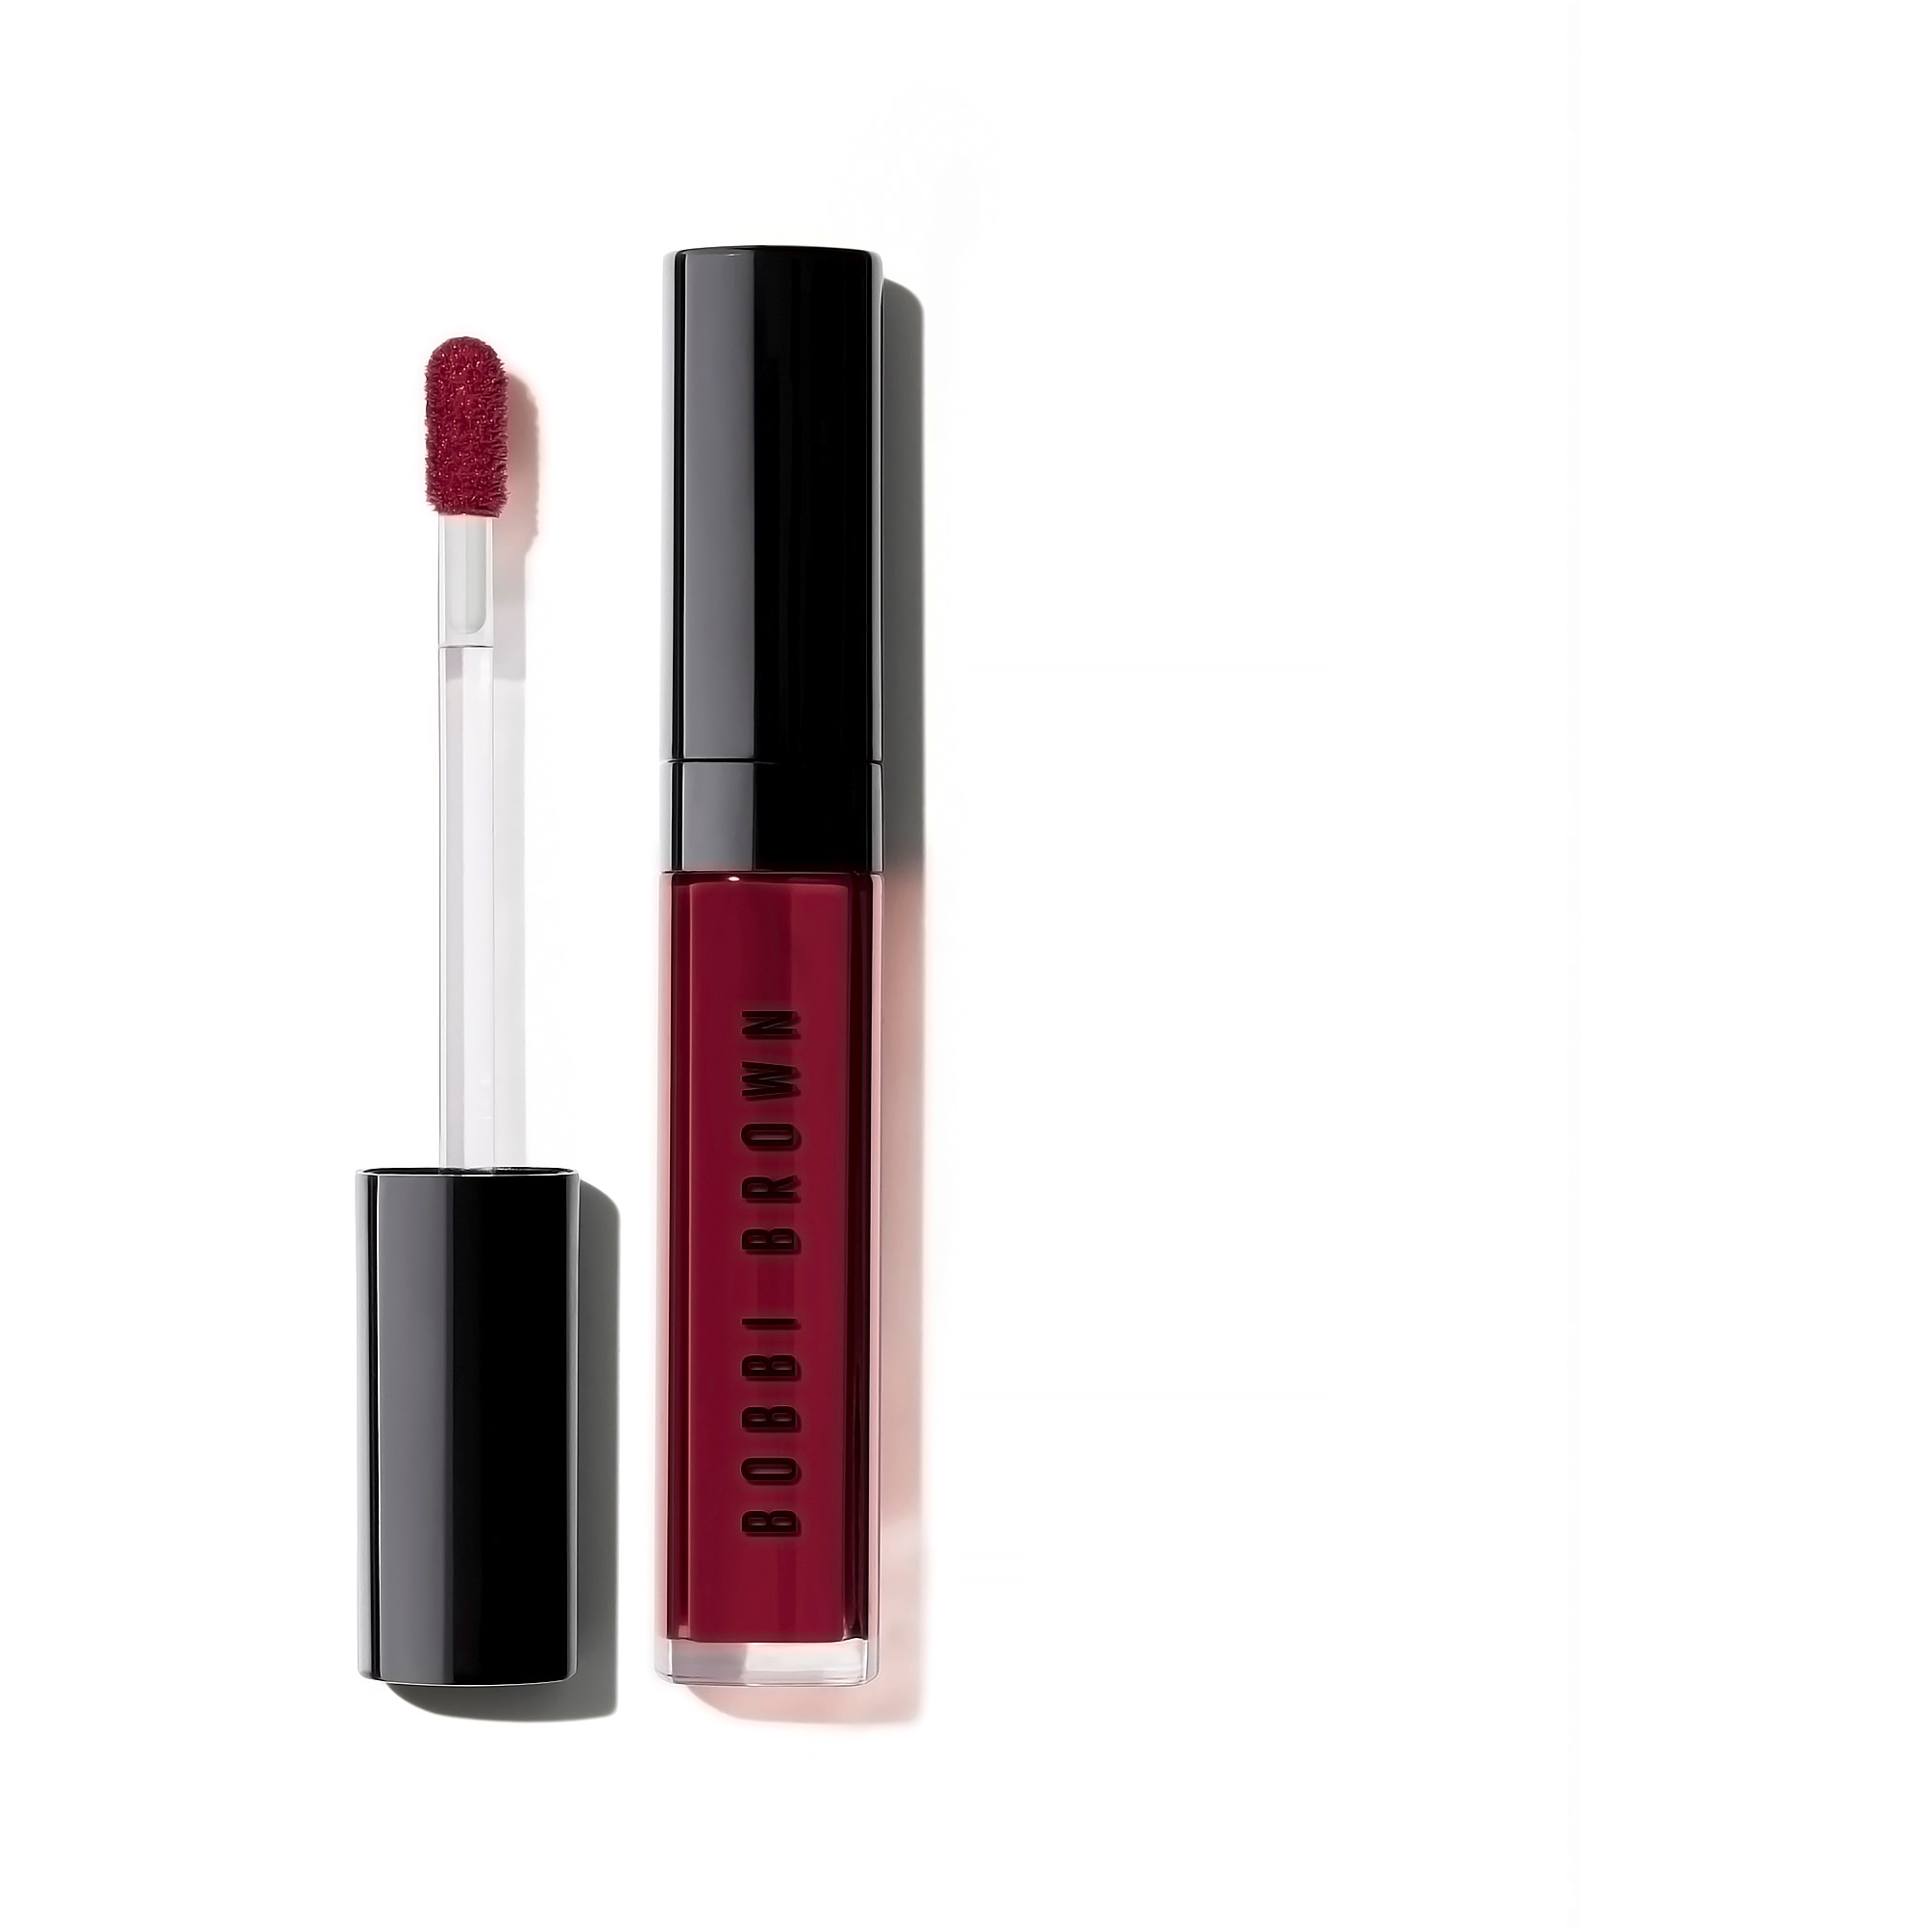 Läs mer om Bobbi Brown Crushed Oil-Infused Gloss After Party